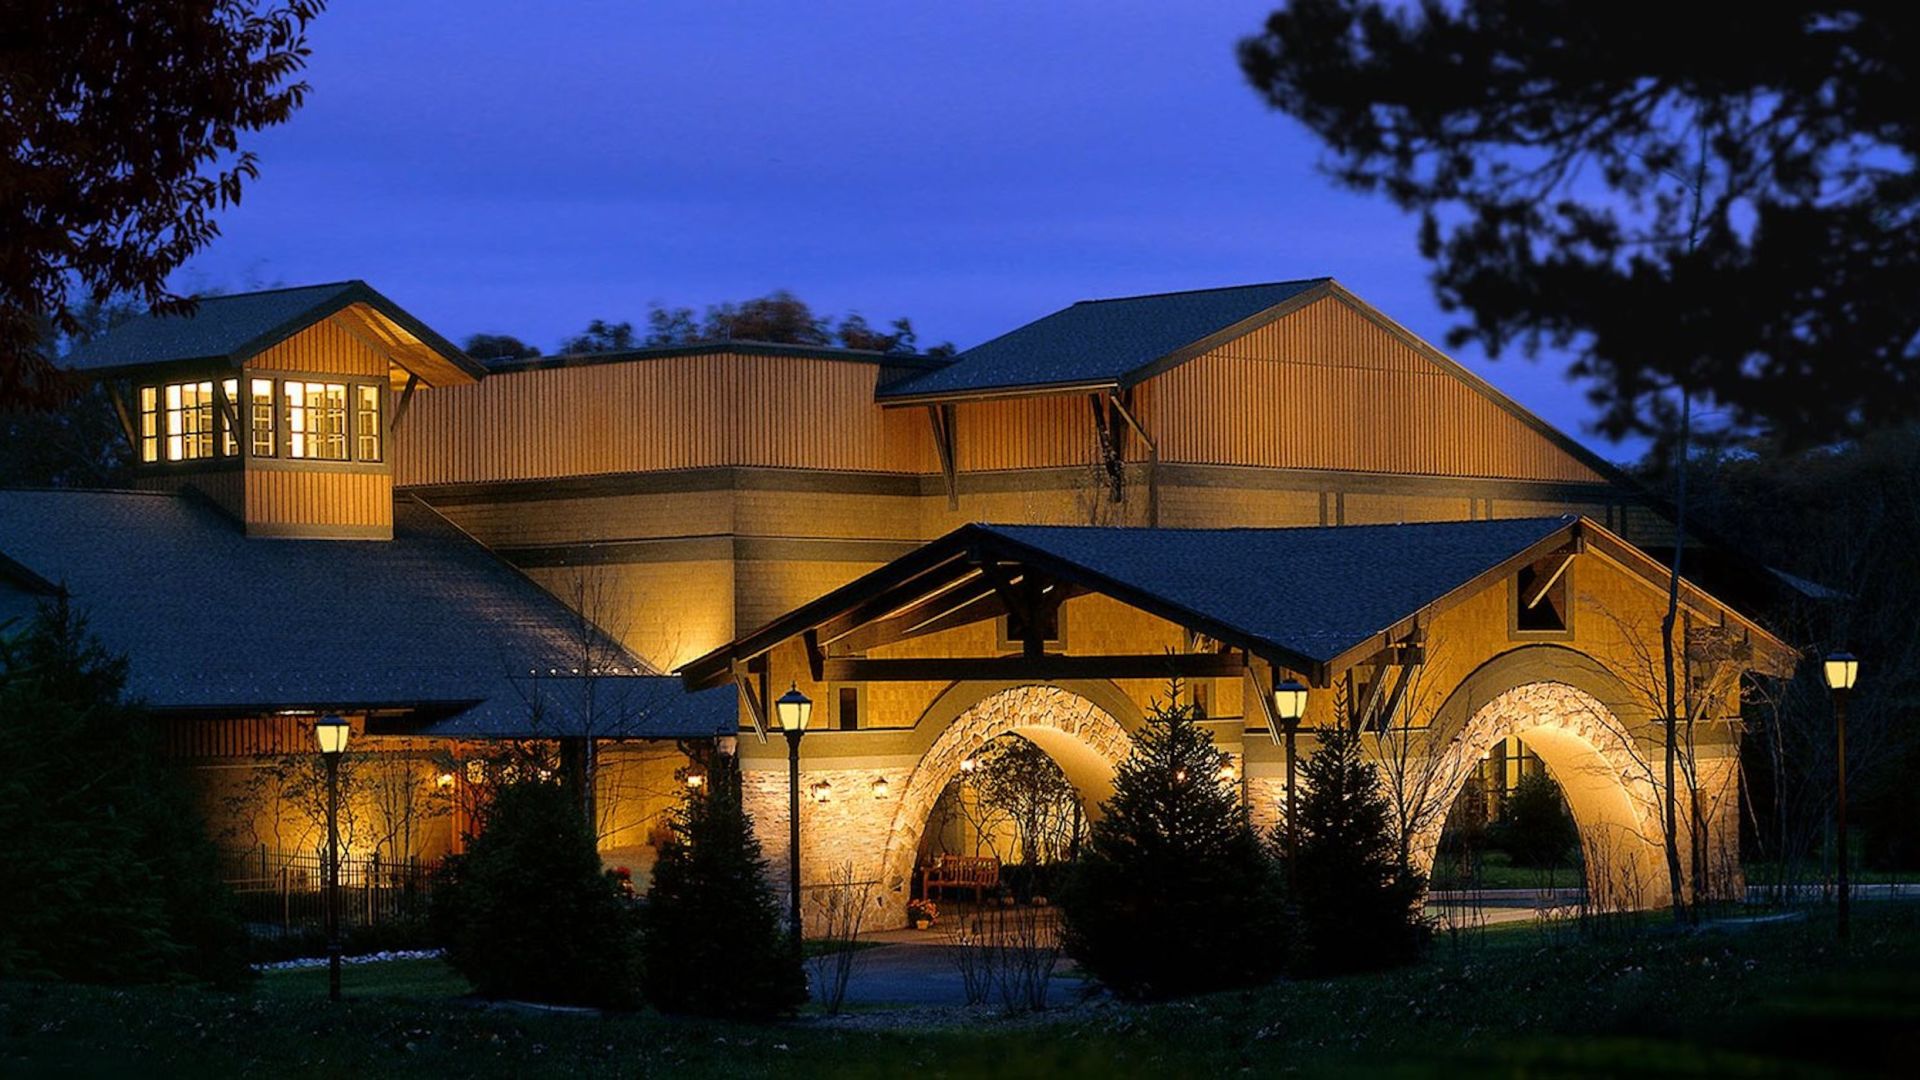 The front entrance of The Lodge at Woodloch at dusk